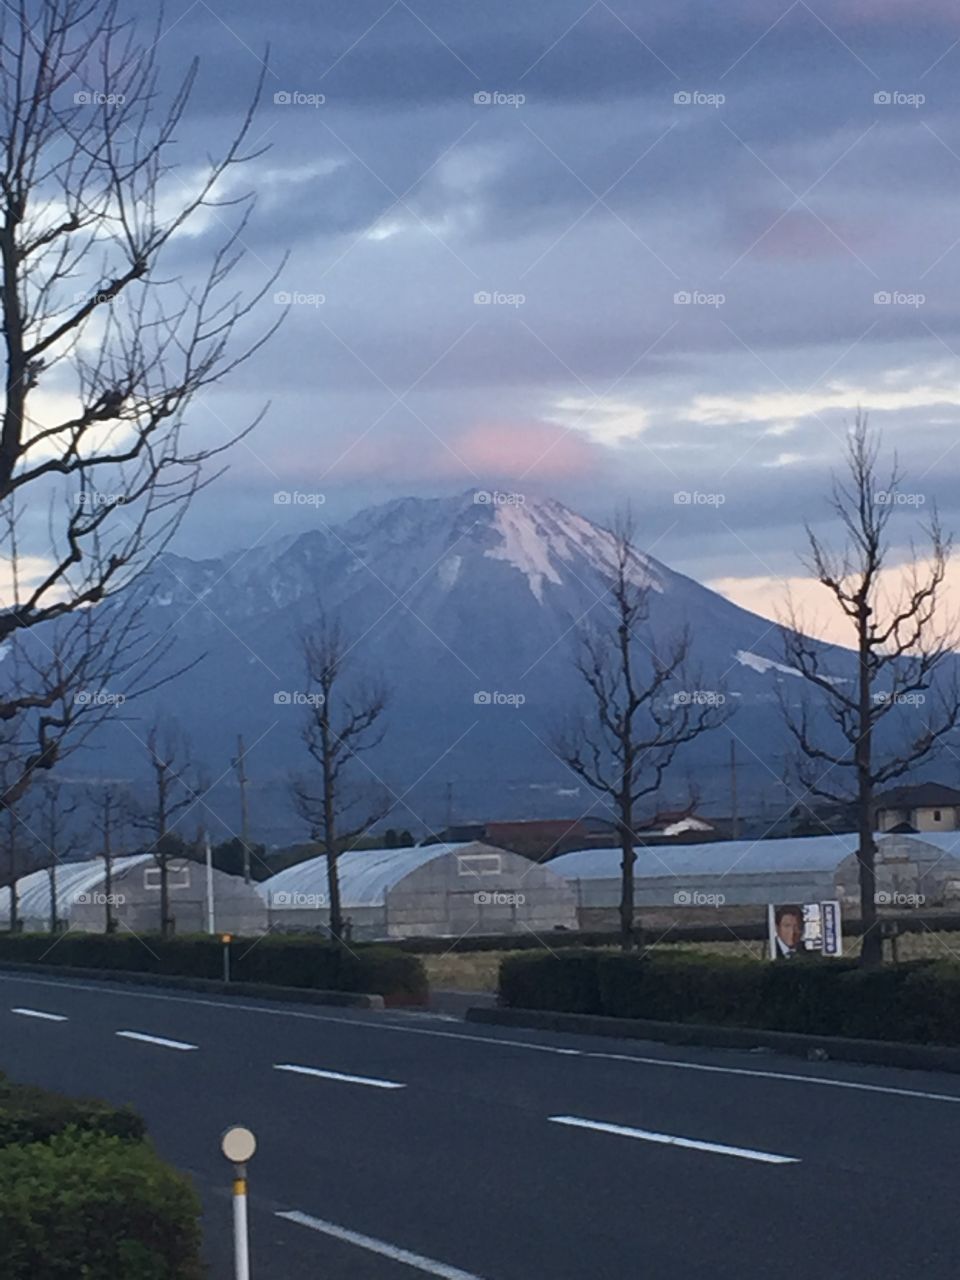 One of the mountains in Japan